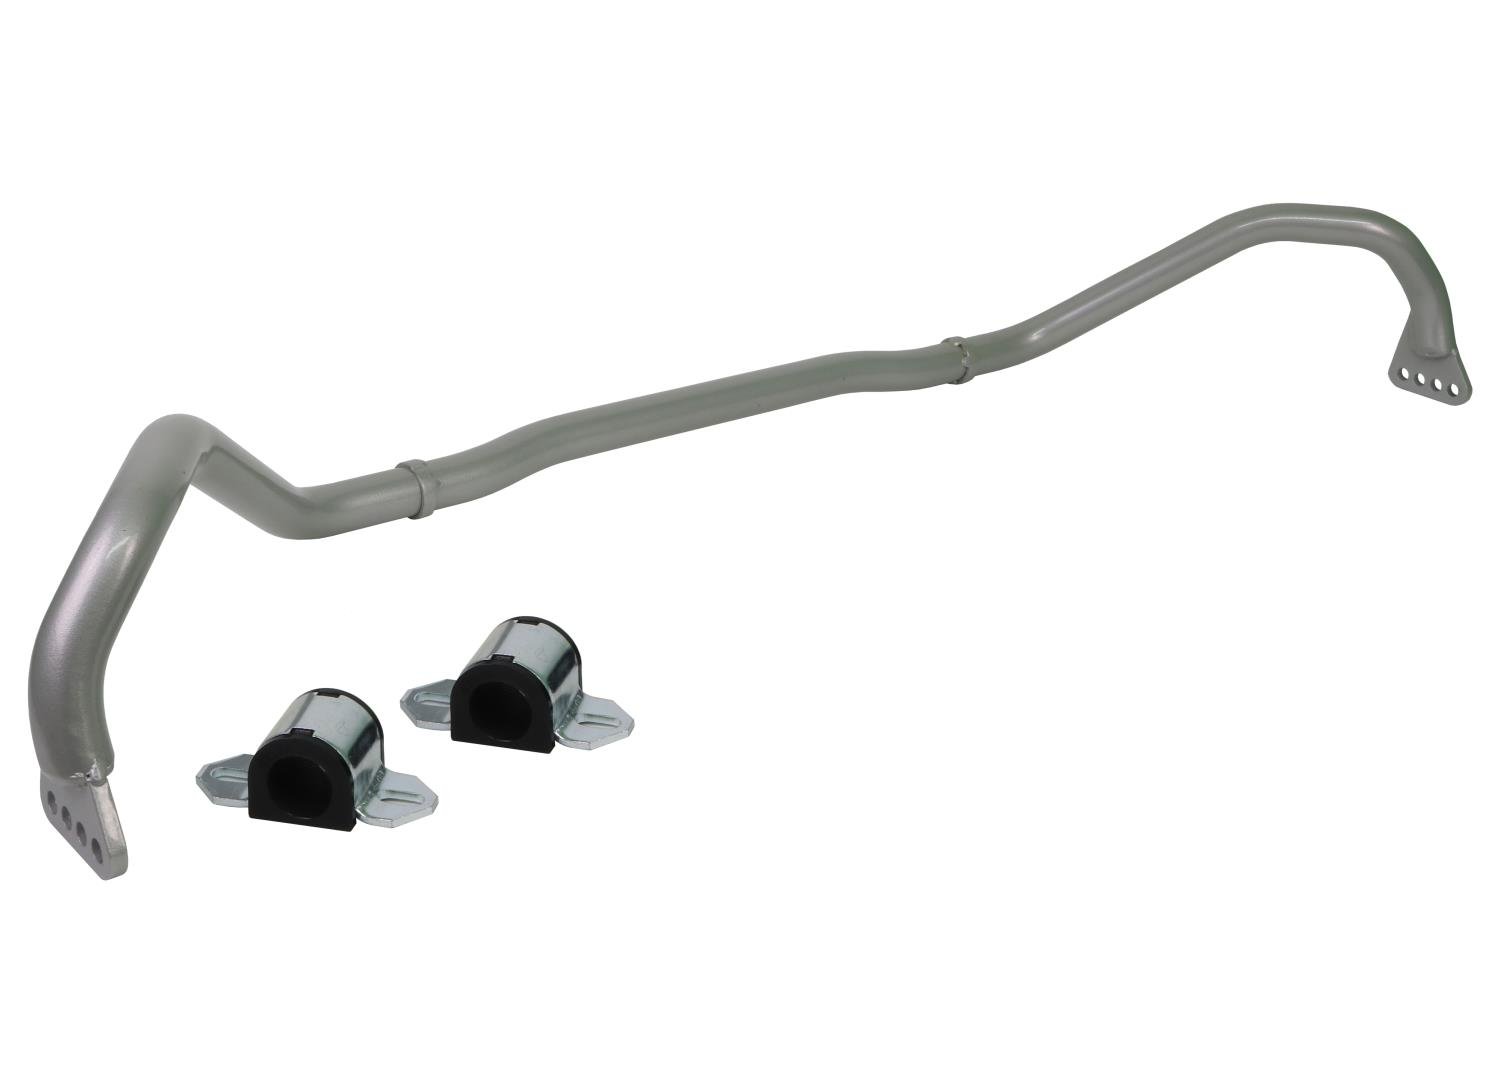 BHF62XZ Front Heavy Duty Adjustable 30 mm Sway Bar for 2008 Pontiac G8, 2014 Chevy SS